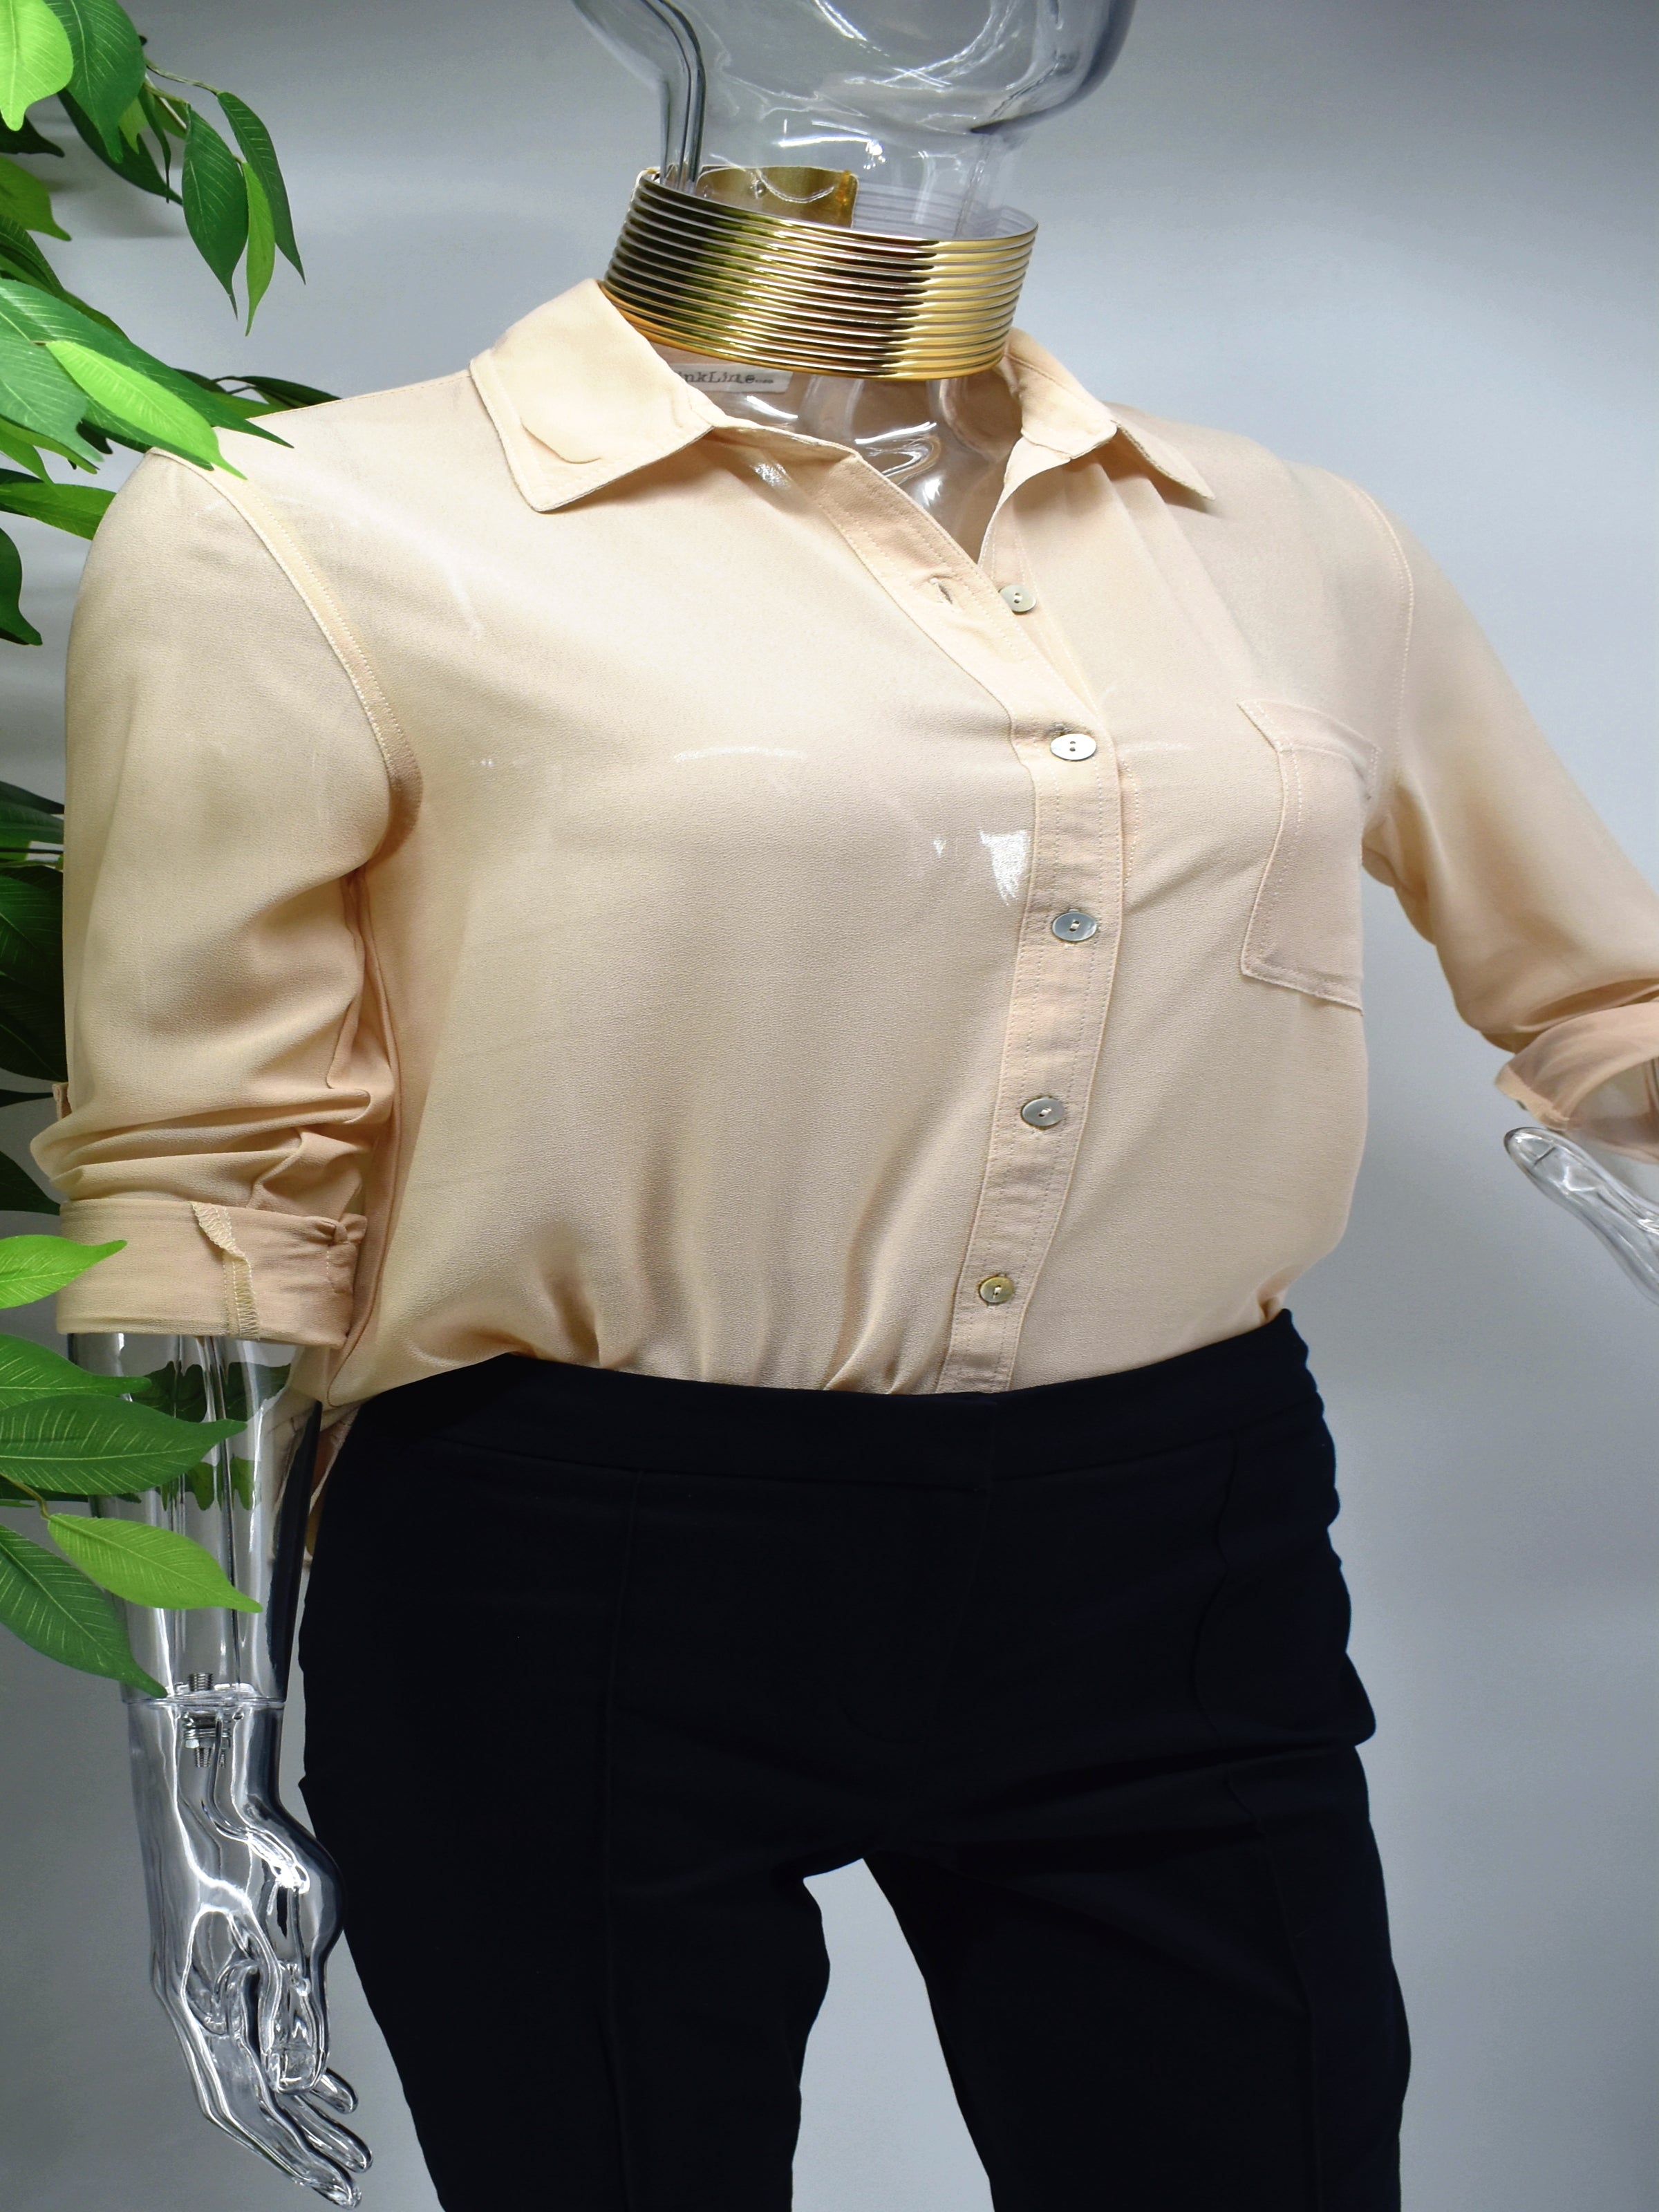 Enjoy an elegant design that never fades with our classic Bayla shirt blouse. Our Bayla is a beige button front shirt blouse loose in fit with a classic rolled cuffed sleeve. 